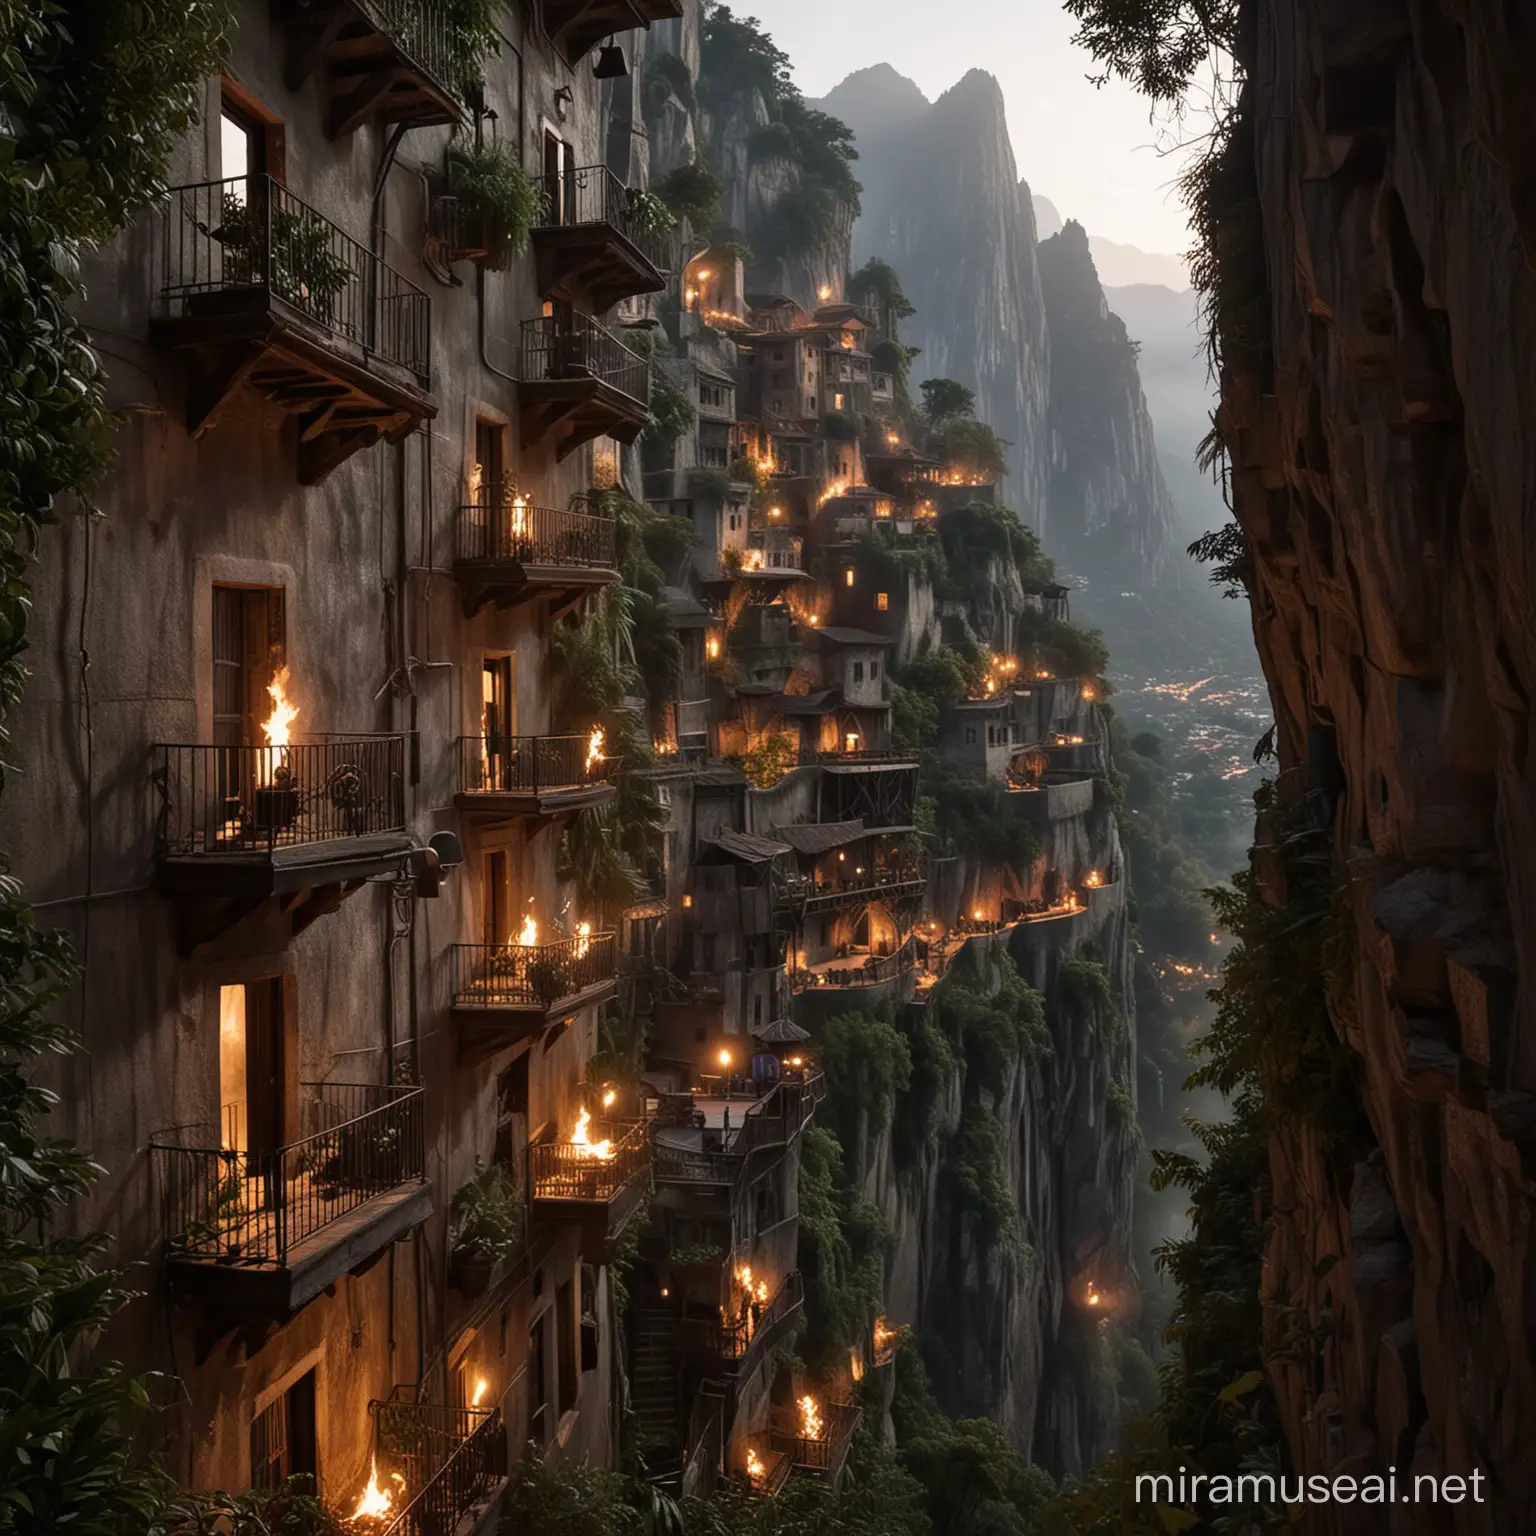 SixStory Spire with Balconies and Torch Glow in Jungle Mountain Town